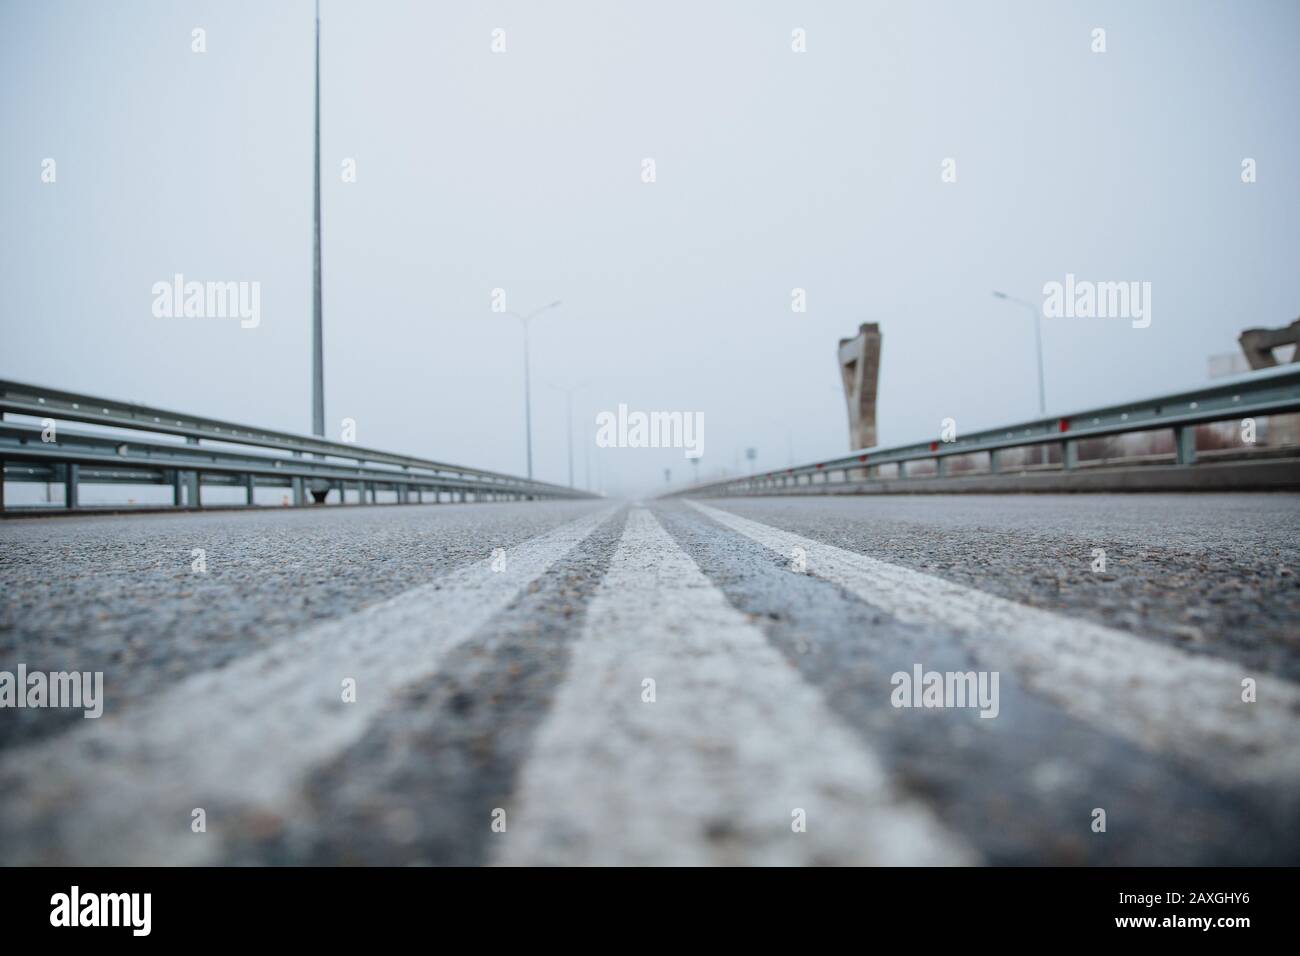 The dividing line on the road is white the view from below on the road paved going. Road markings on asphalt on the street. Stock Photo